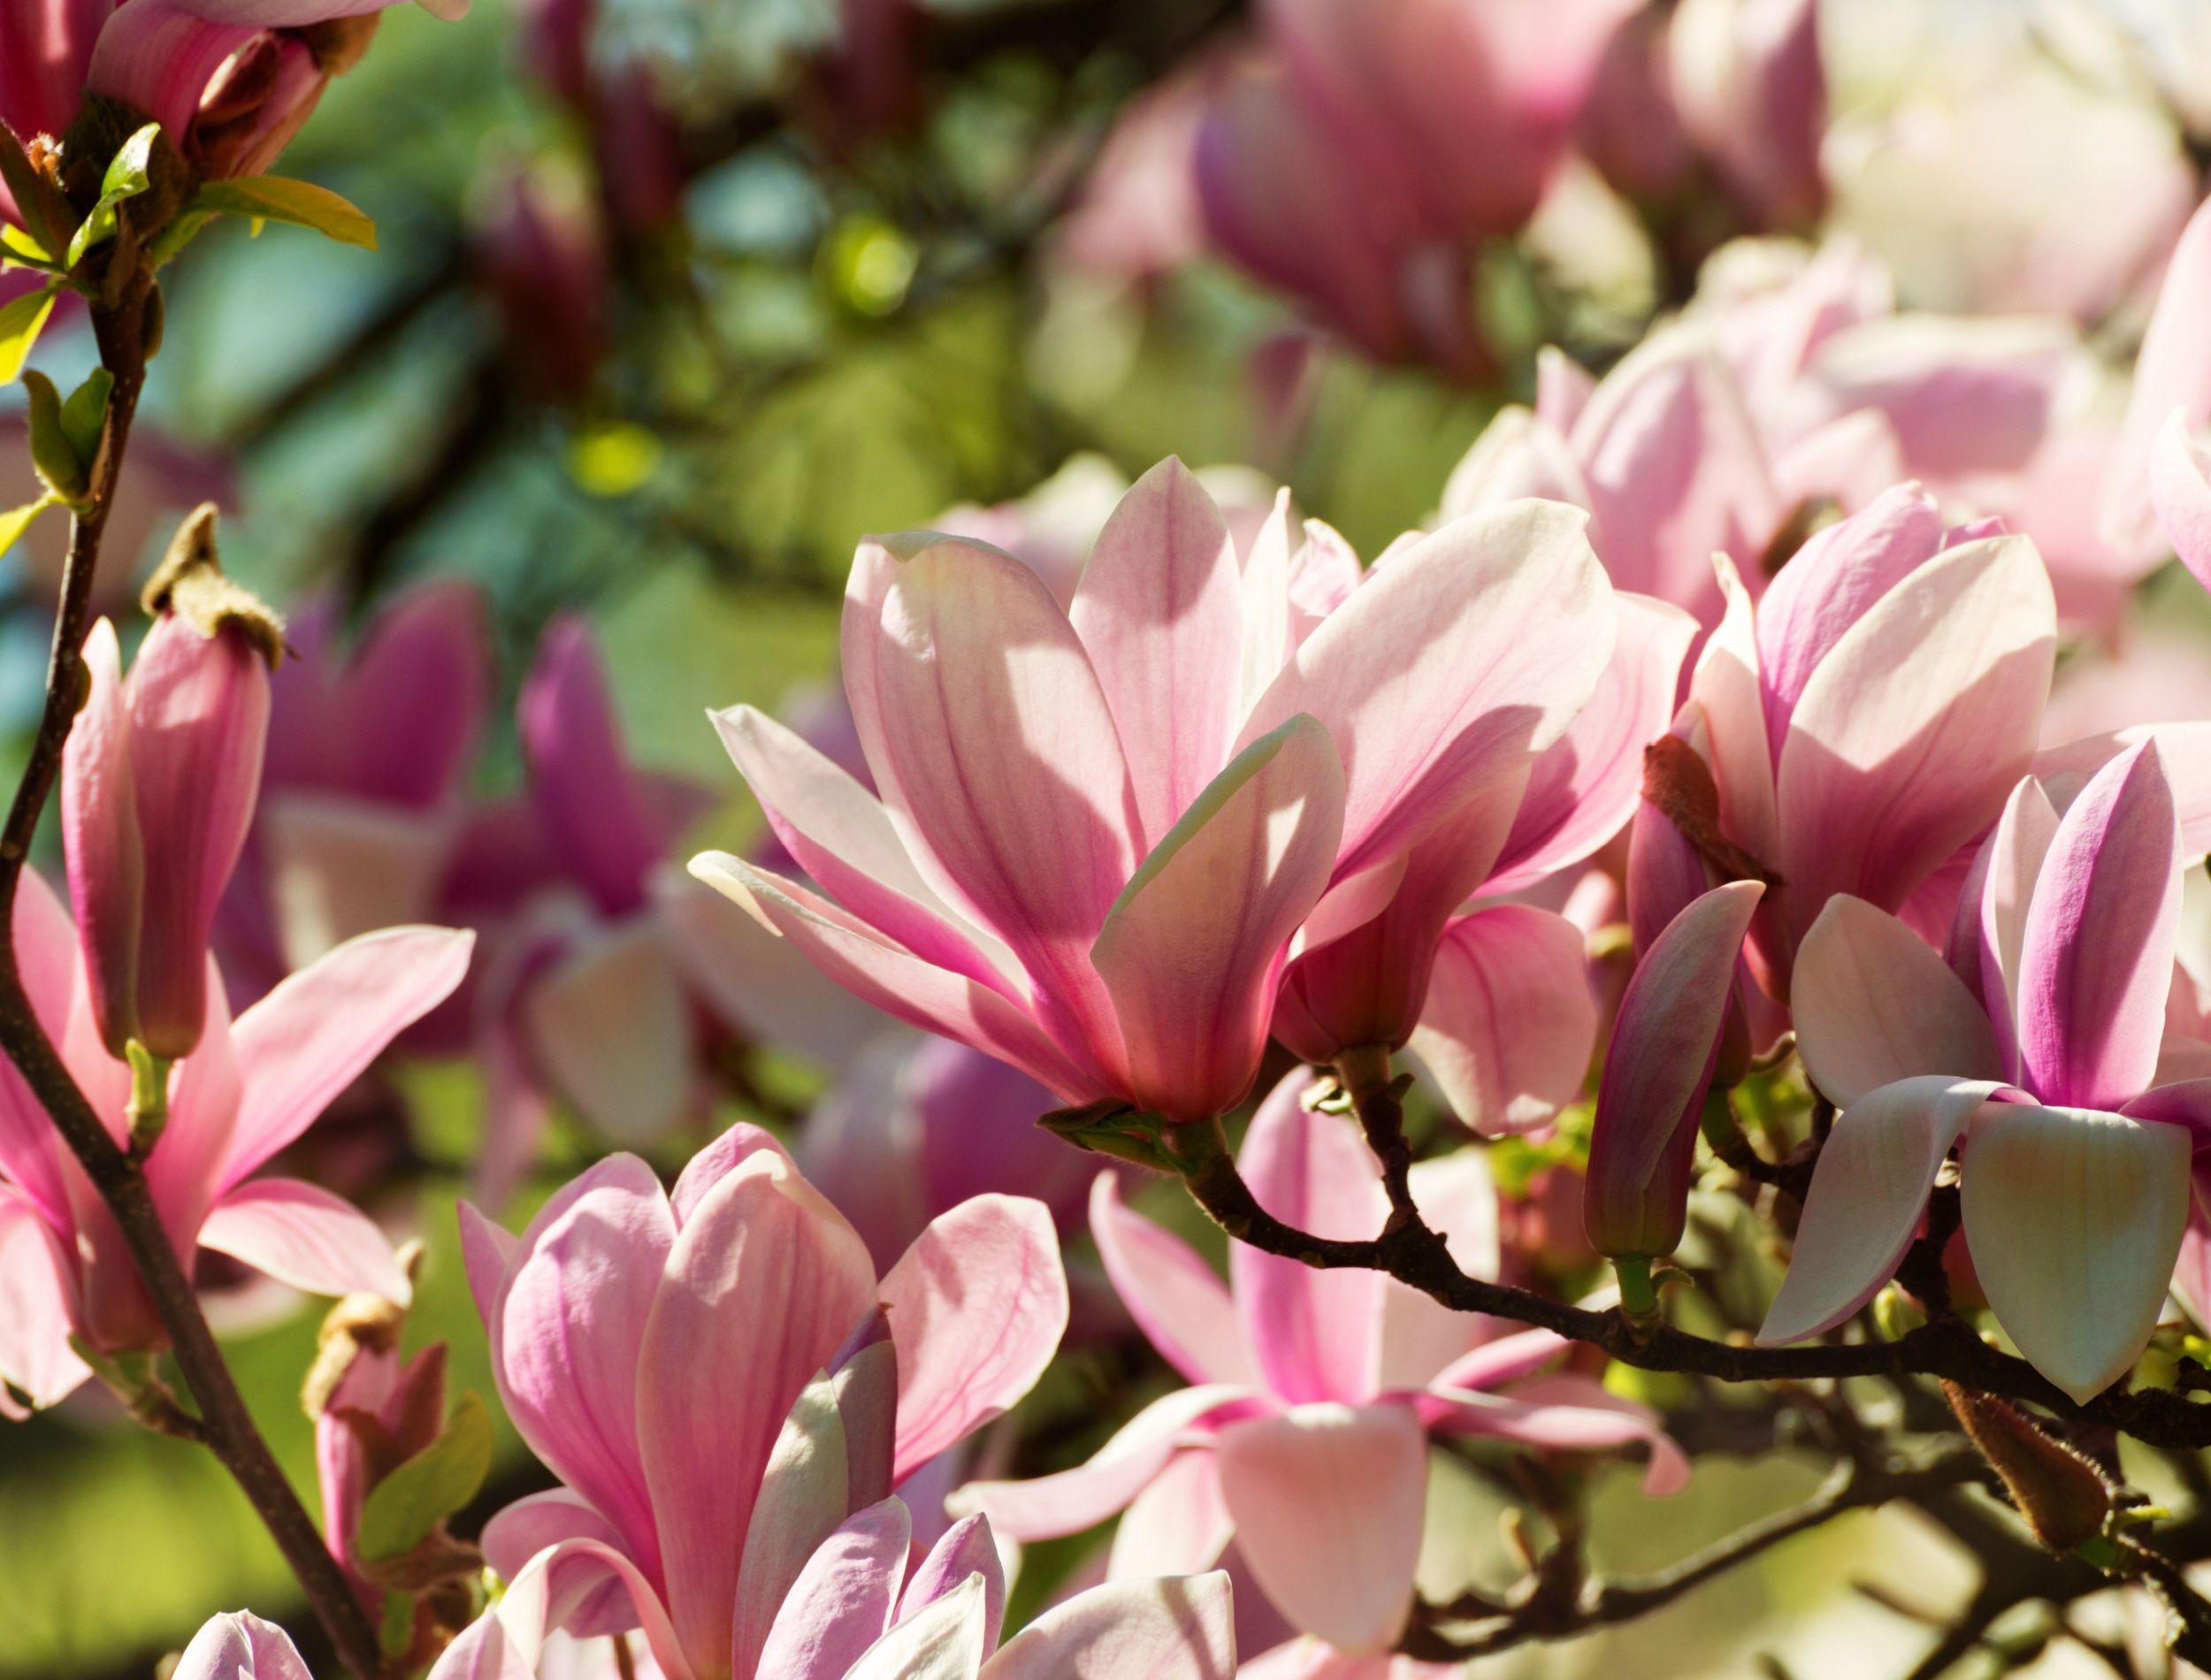 Flowers of the magnolia tree close up